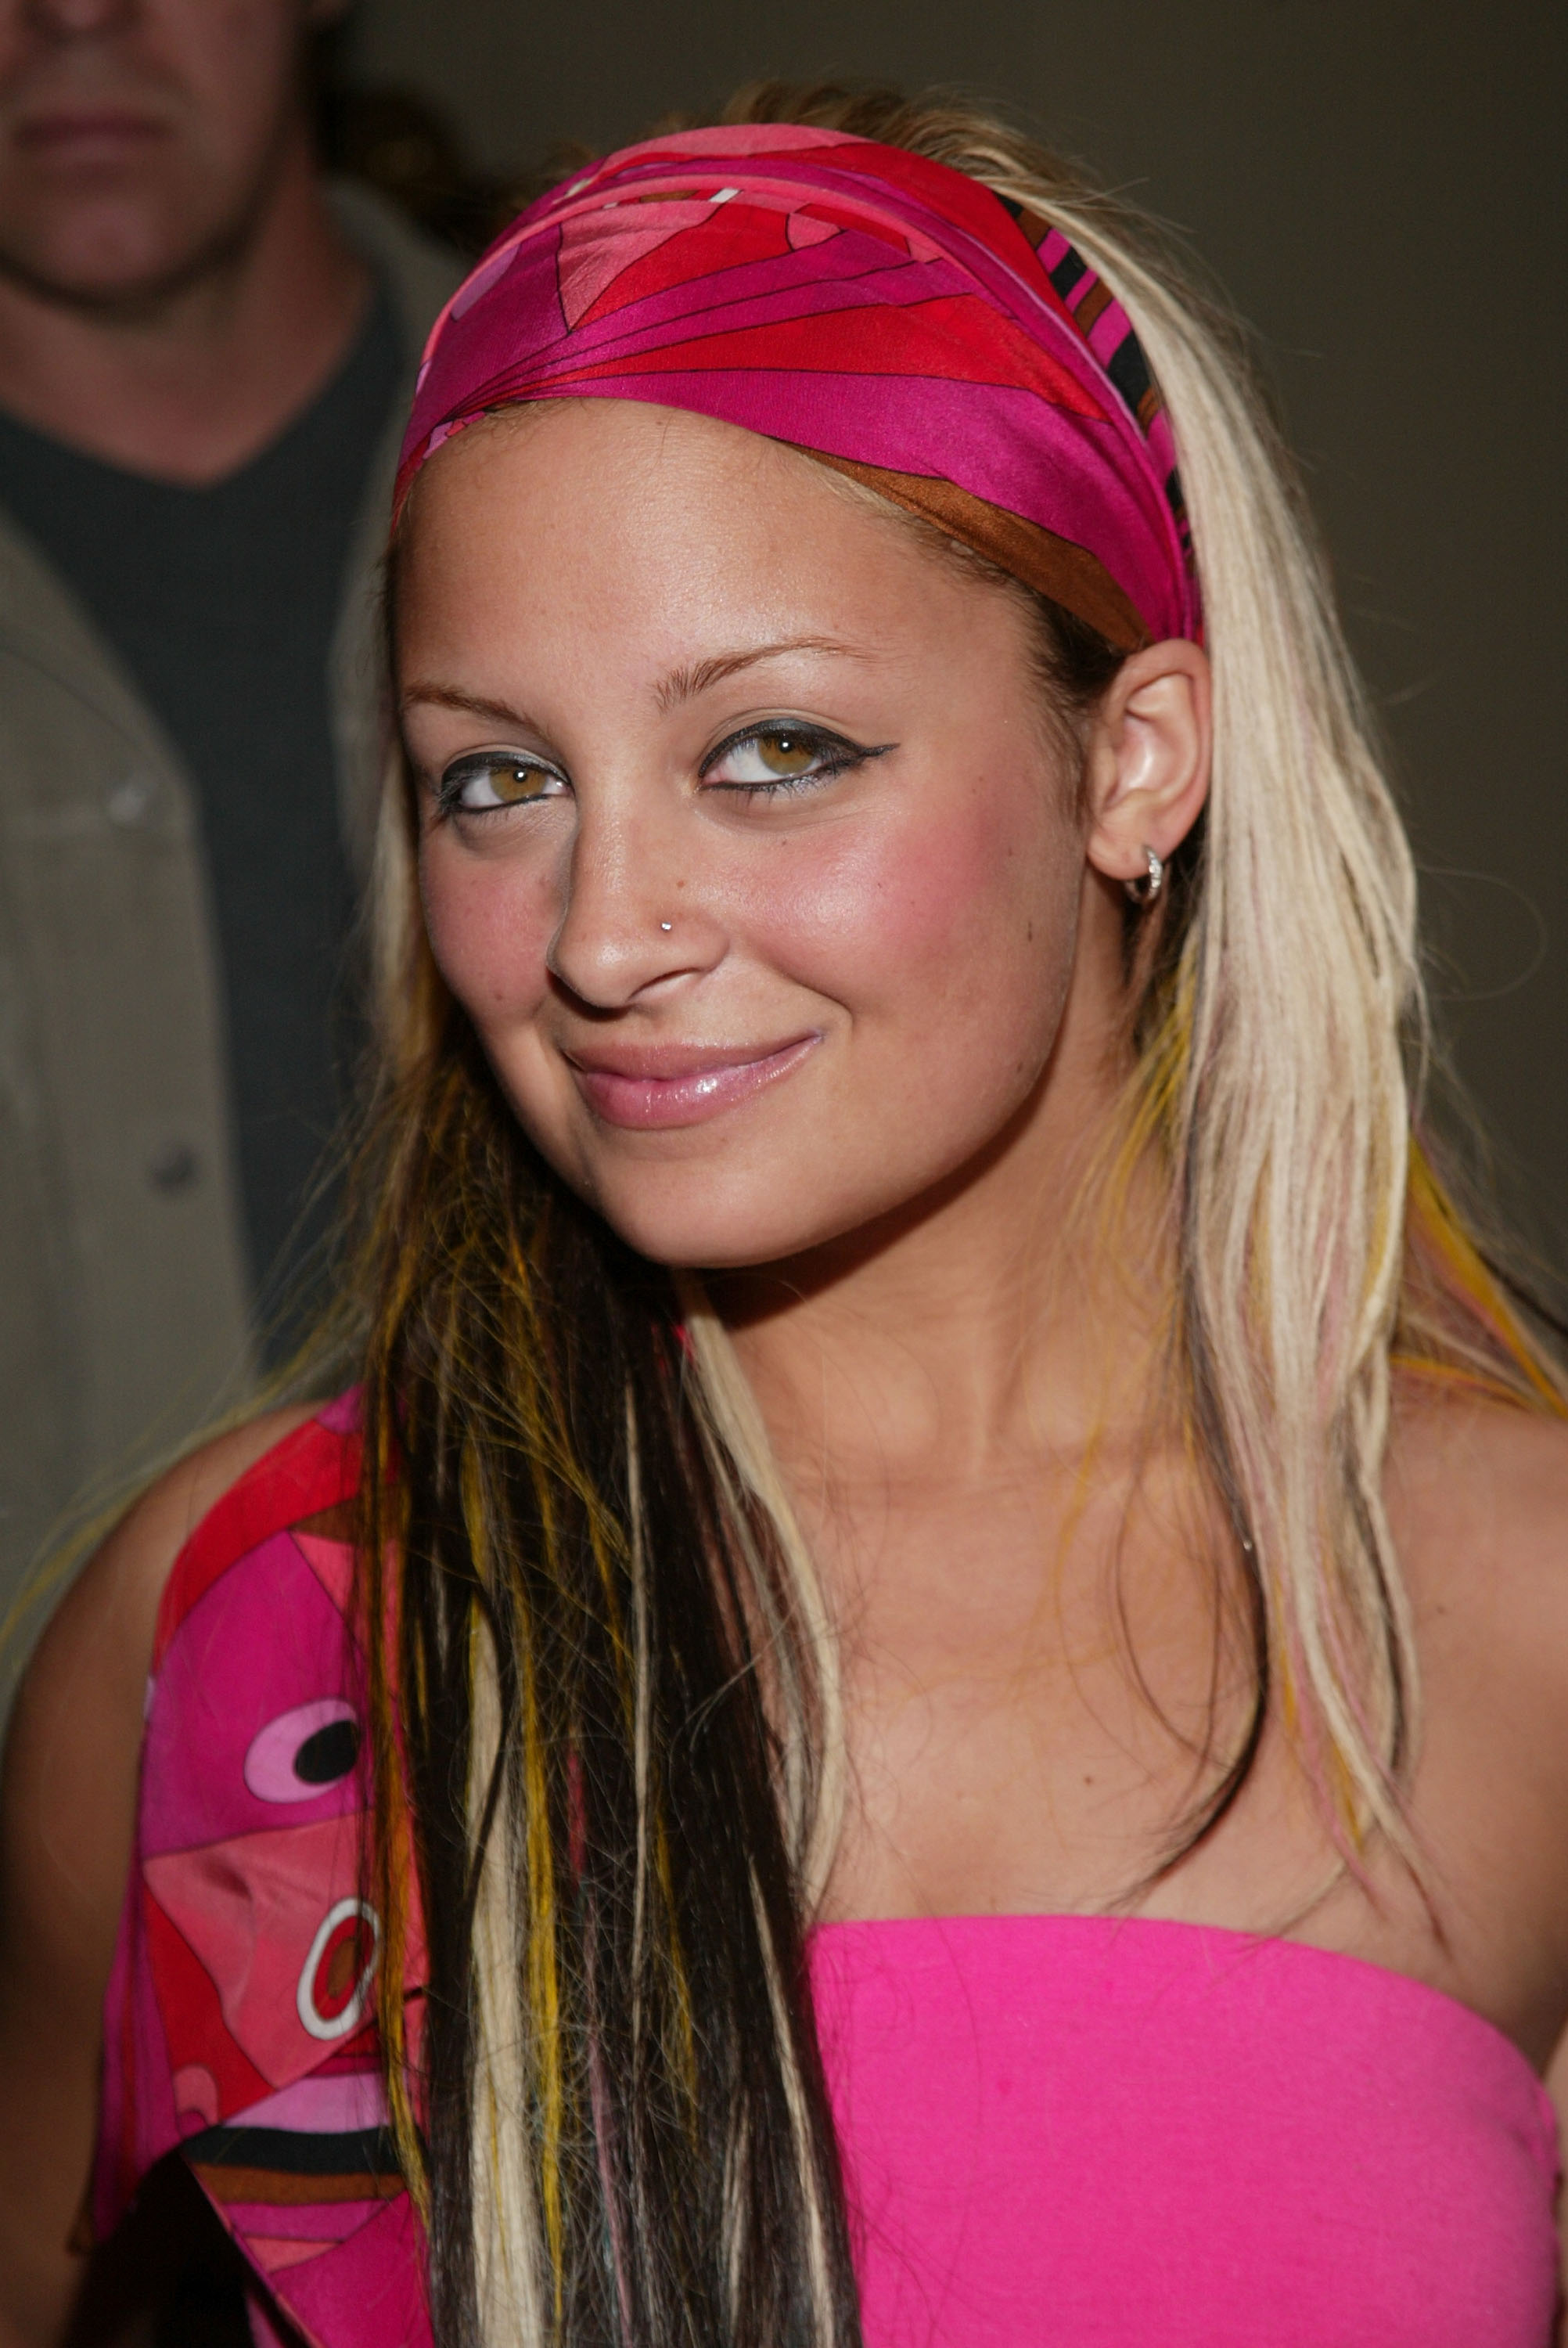 Nicole Richie attends a PlayStation 2 Pre- Super Bowl party at The Whiskey in the Hotel Icon on January 29, 2004 in Houston, Texas. | Source: Getty Images